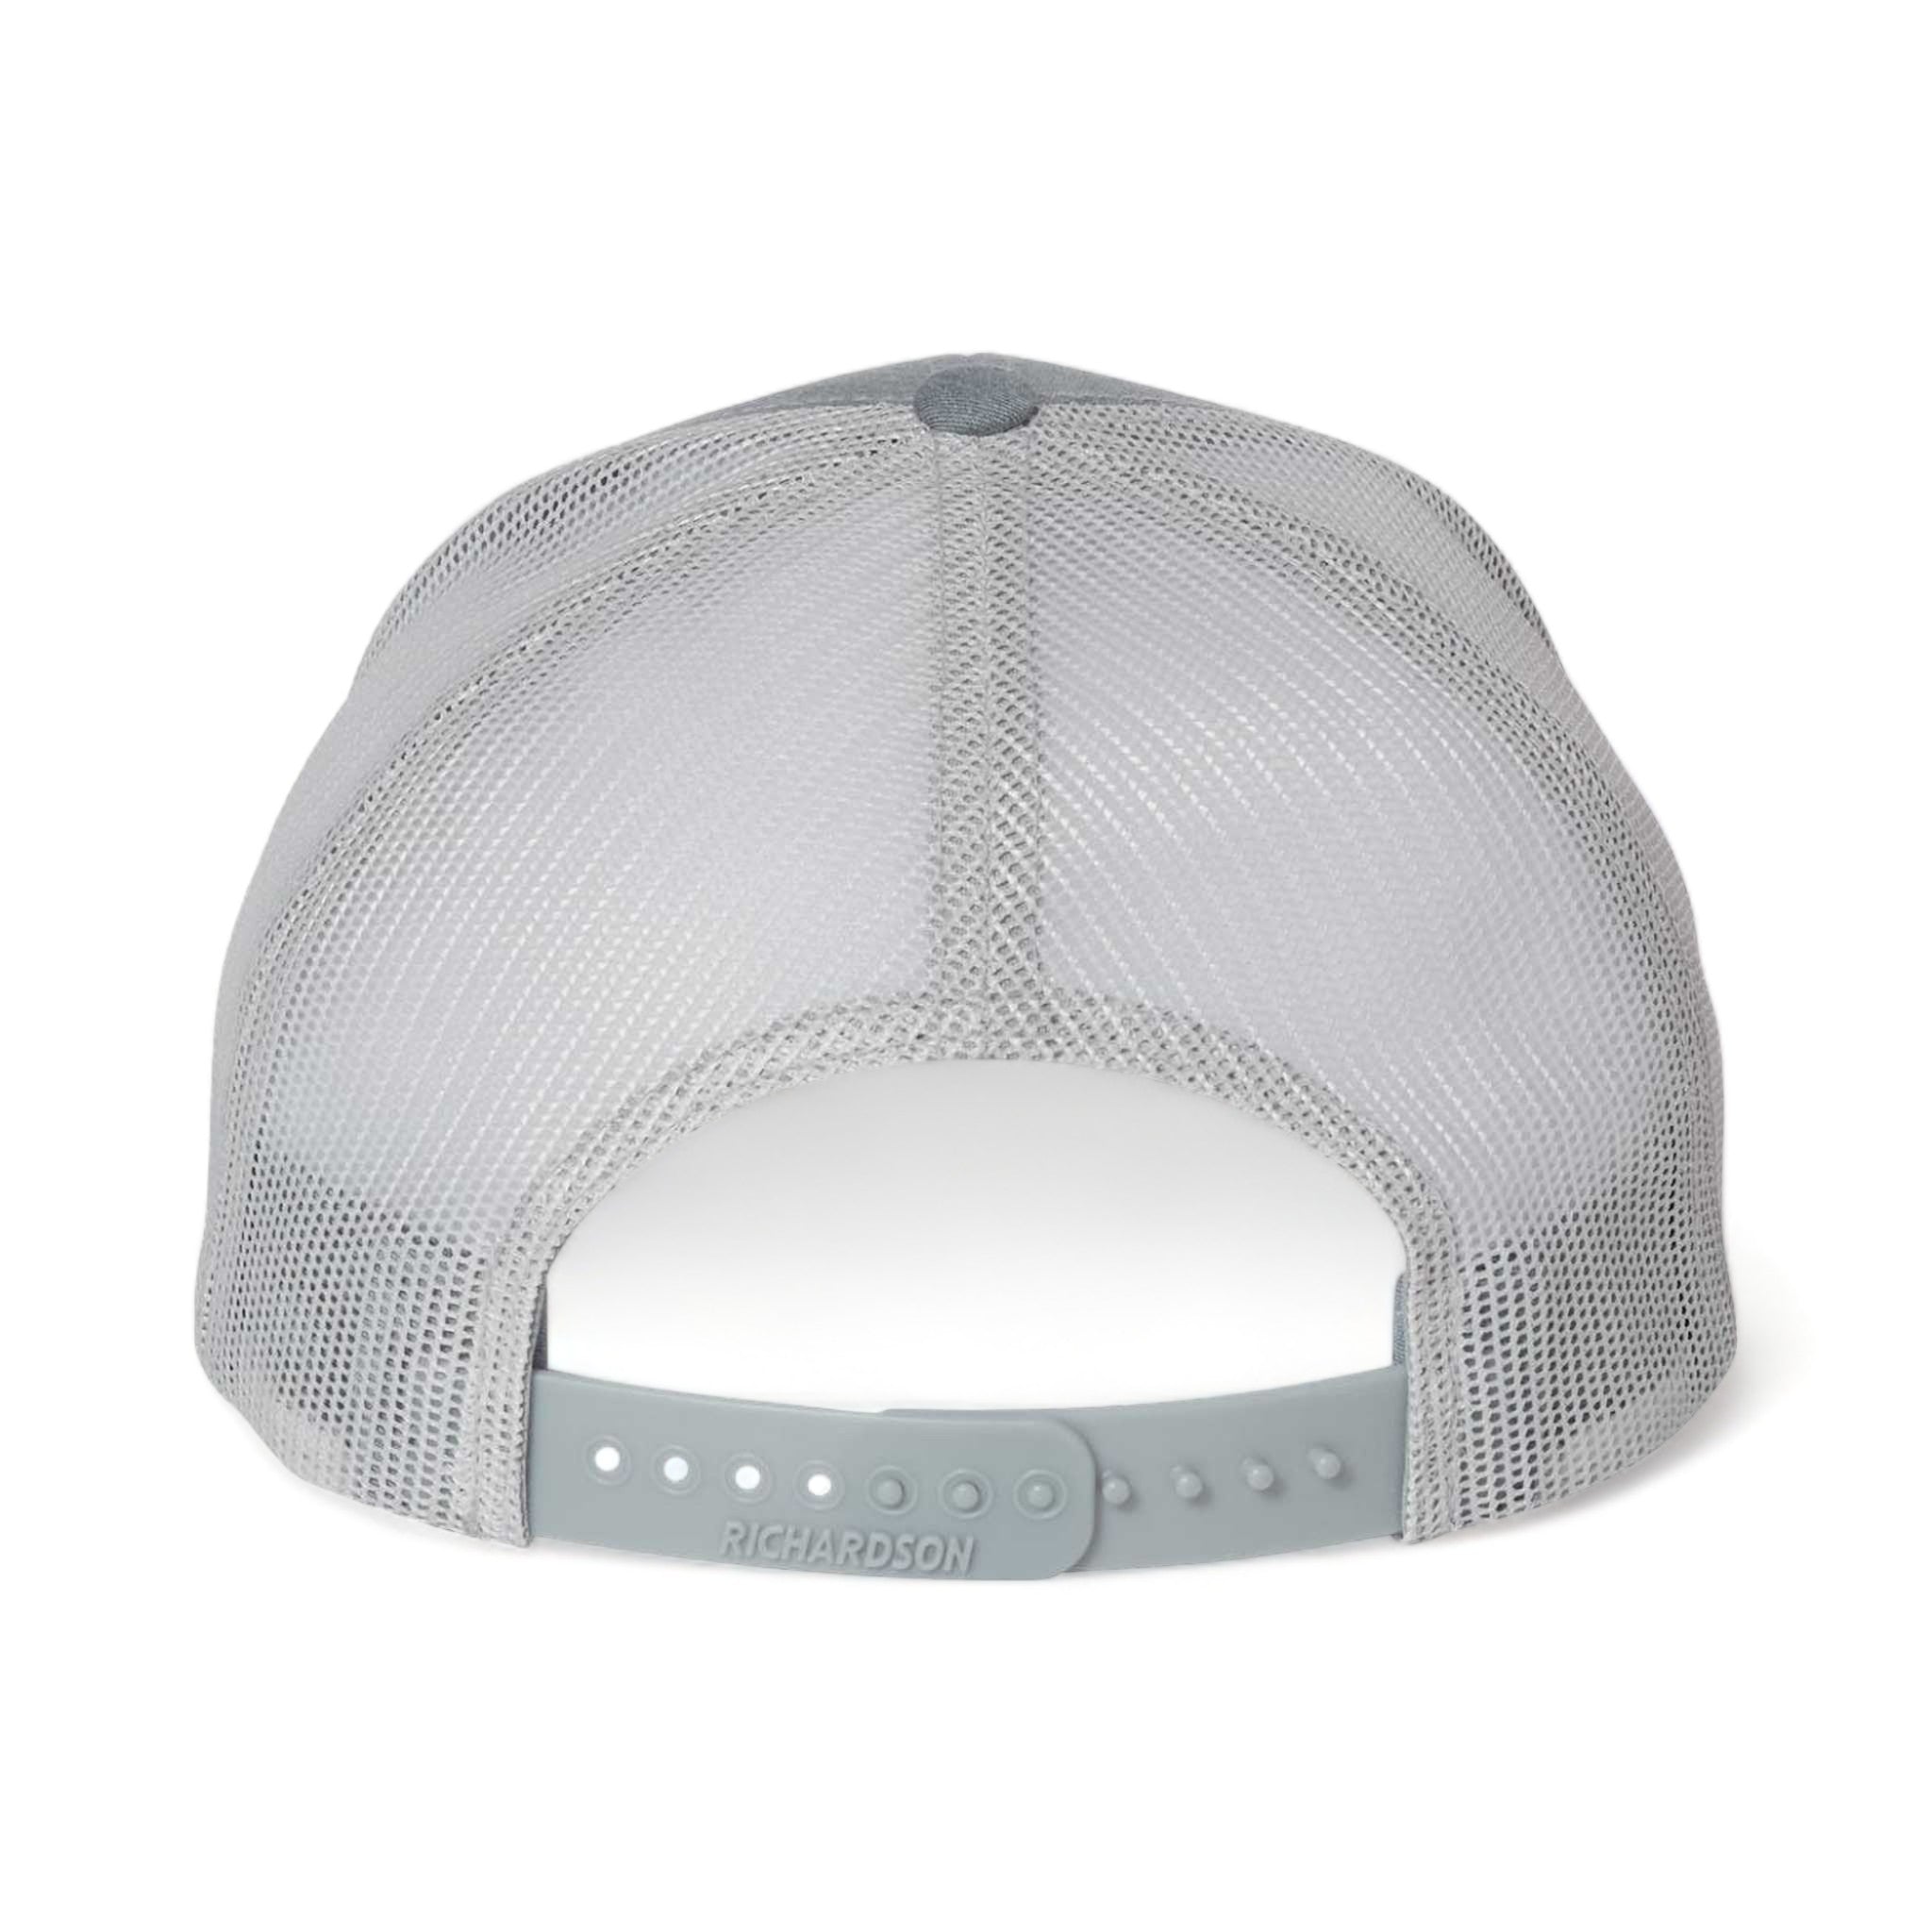 Back view of Richardson 112 custom hat in heather grey and light grey